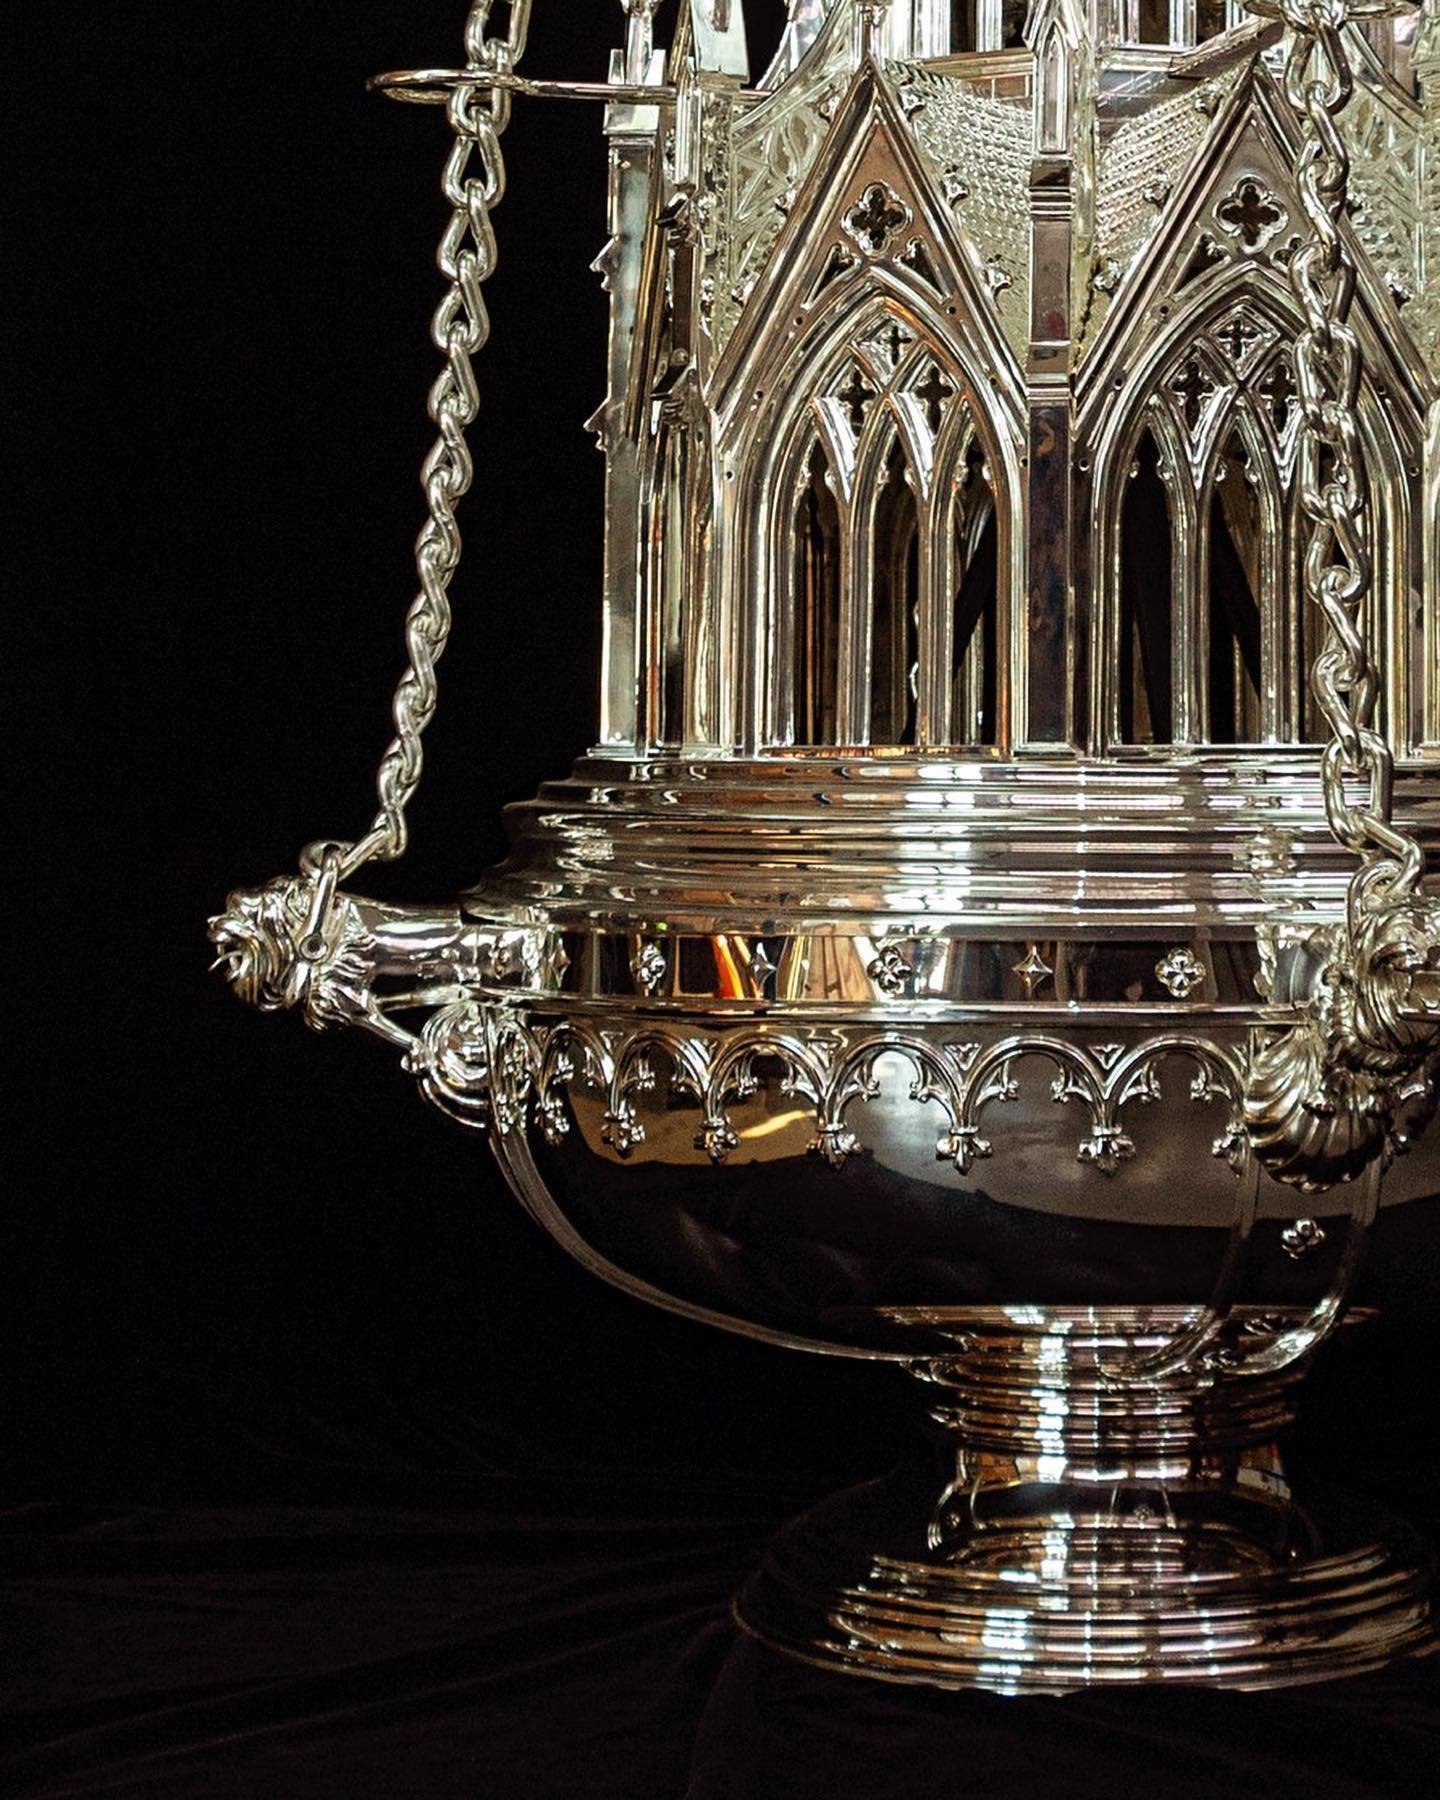 The Great Censer we have been honored to design and produce as a completely bespoke, ex novo composition, is soon to debut as the tallest liturgical censer in the world. Crafted in a neogothic style, this censer surpasses the censers of Cava de Tirre